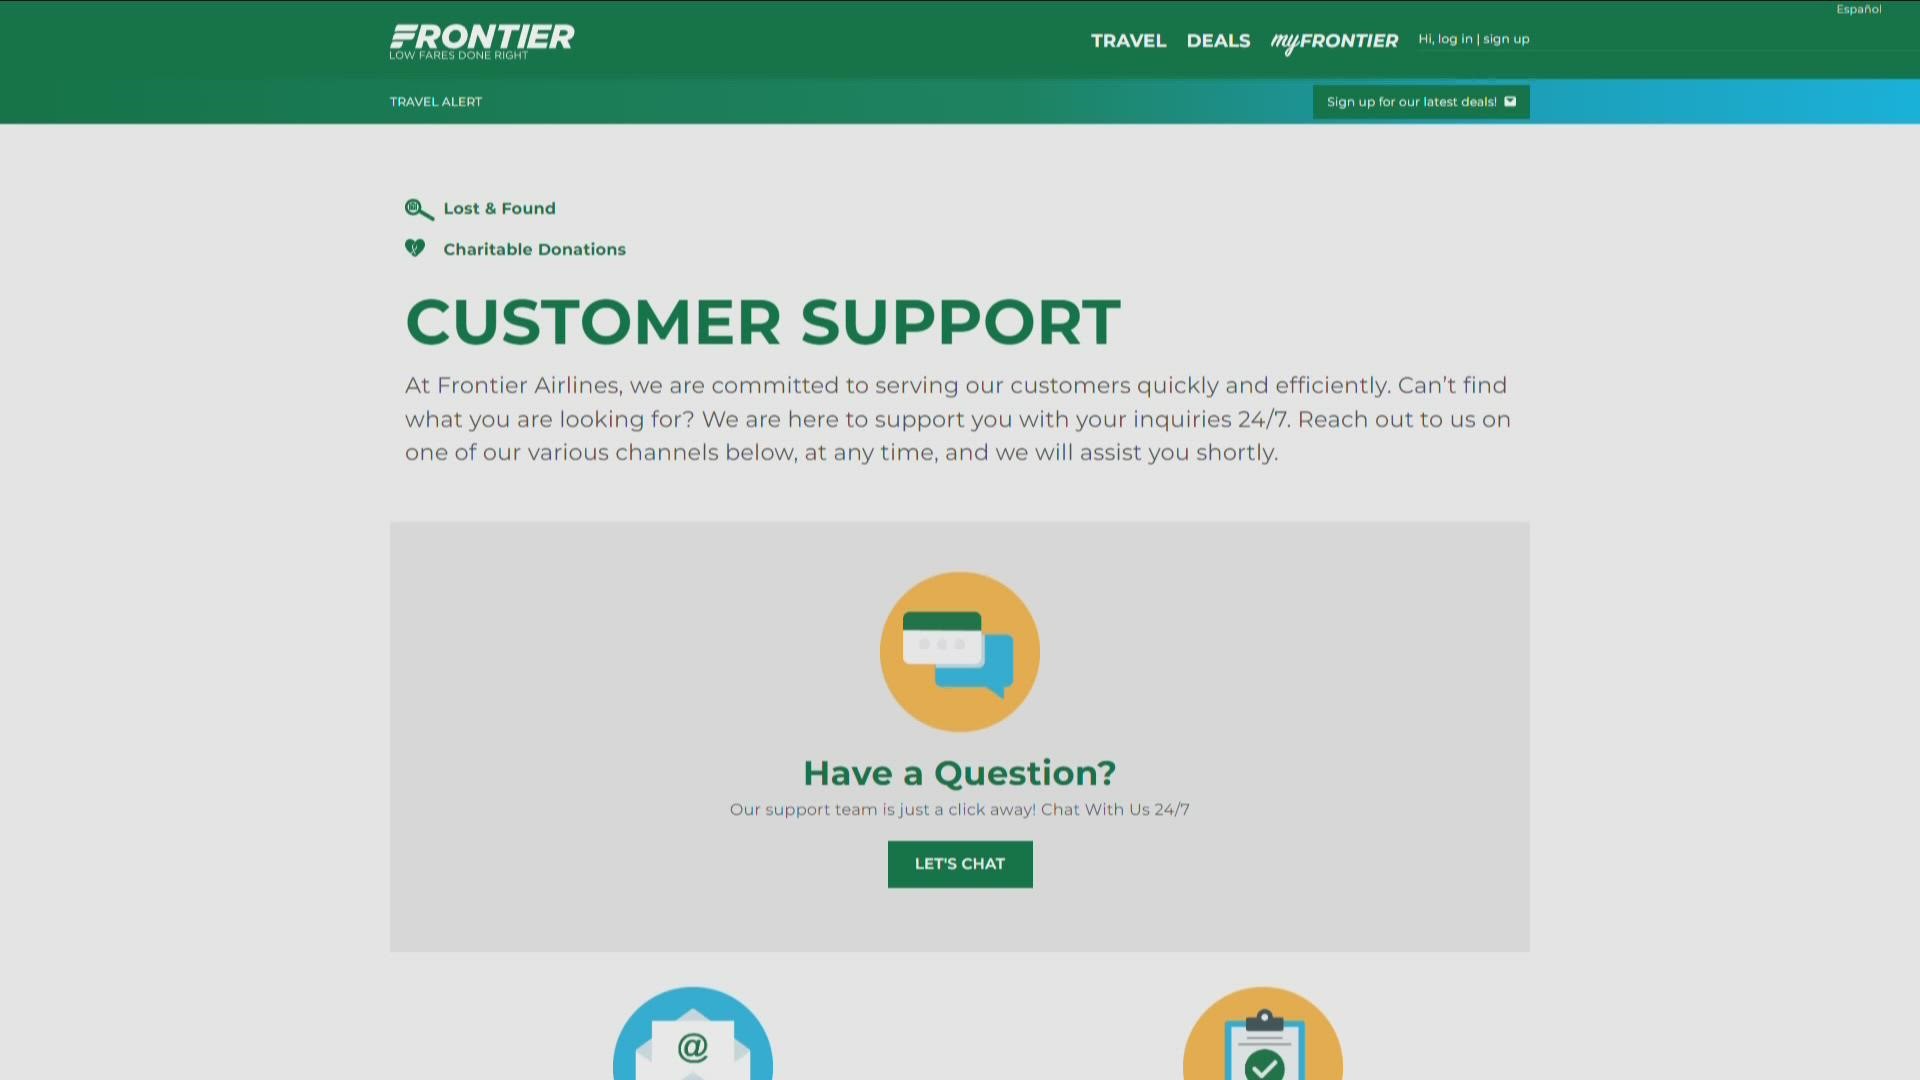 Instead, customers will access Frontier's agents through its website, via WhatsApp or on social media.